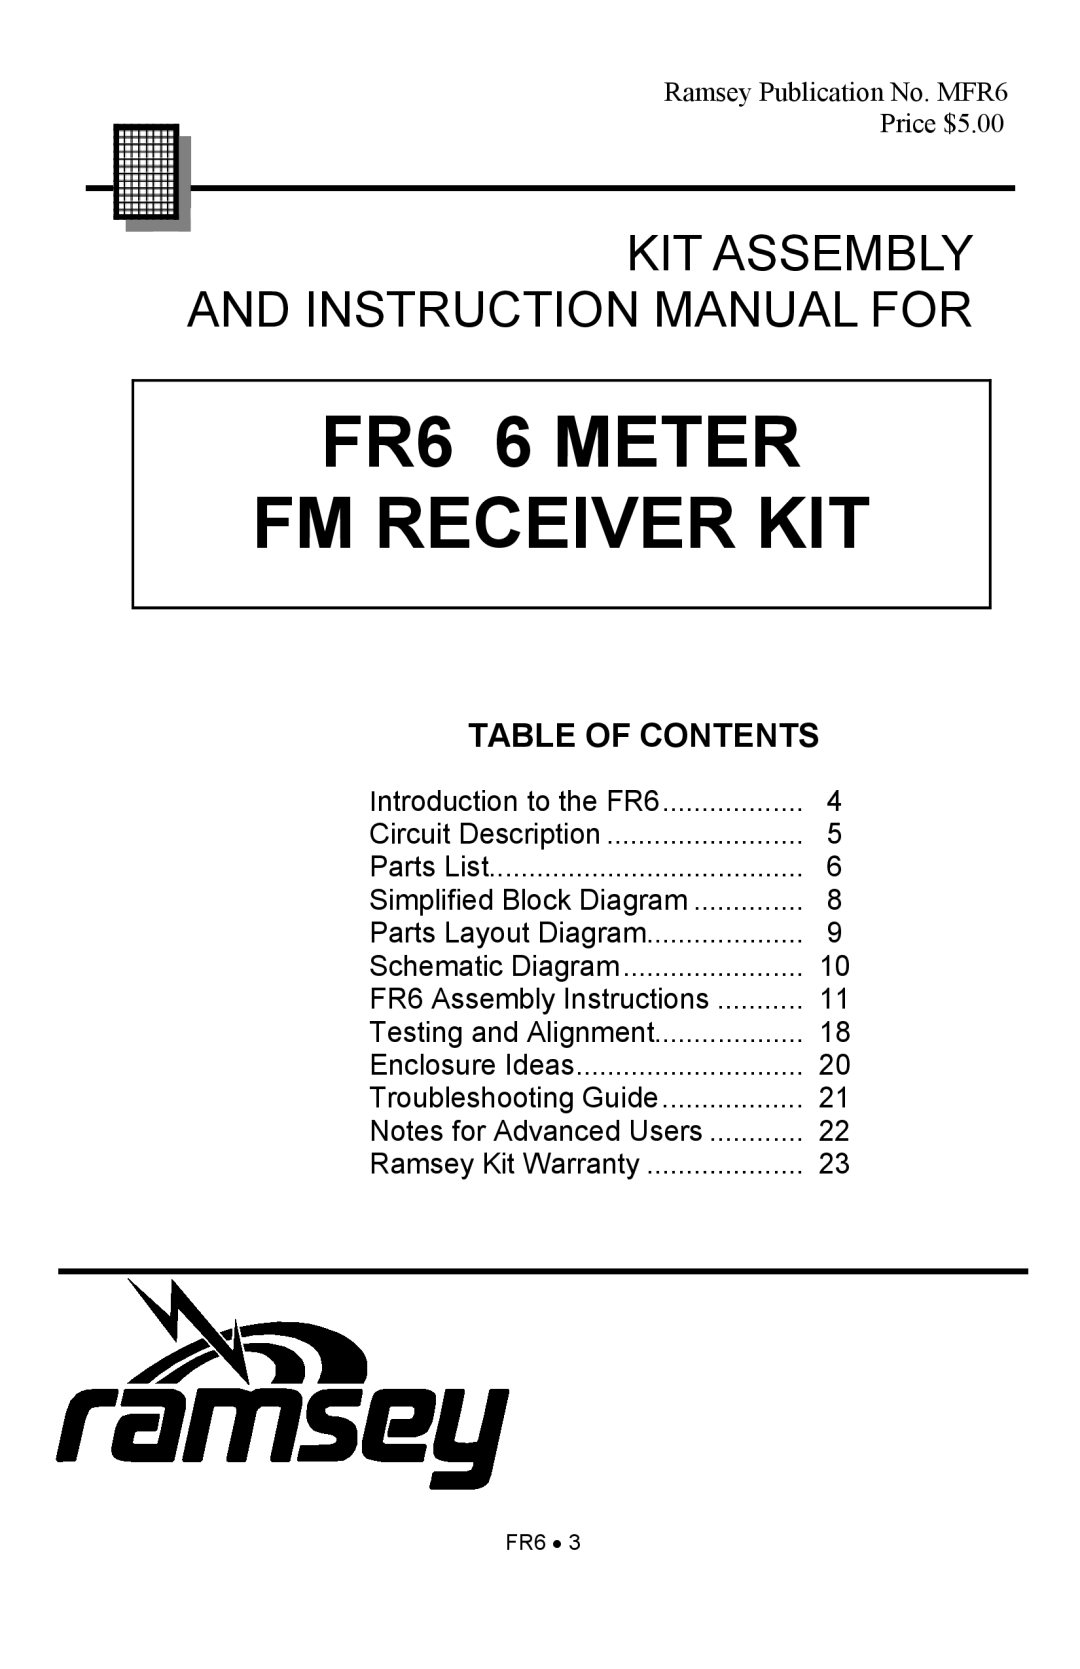 Ramsey Electronics manual FR6 6 METER FM RECEIVER KIT, Table Of Contents, Kit Assembly 